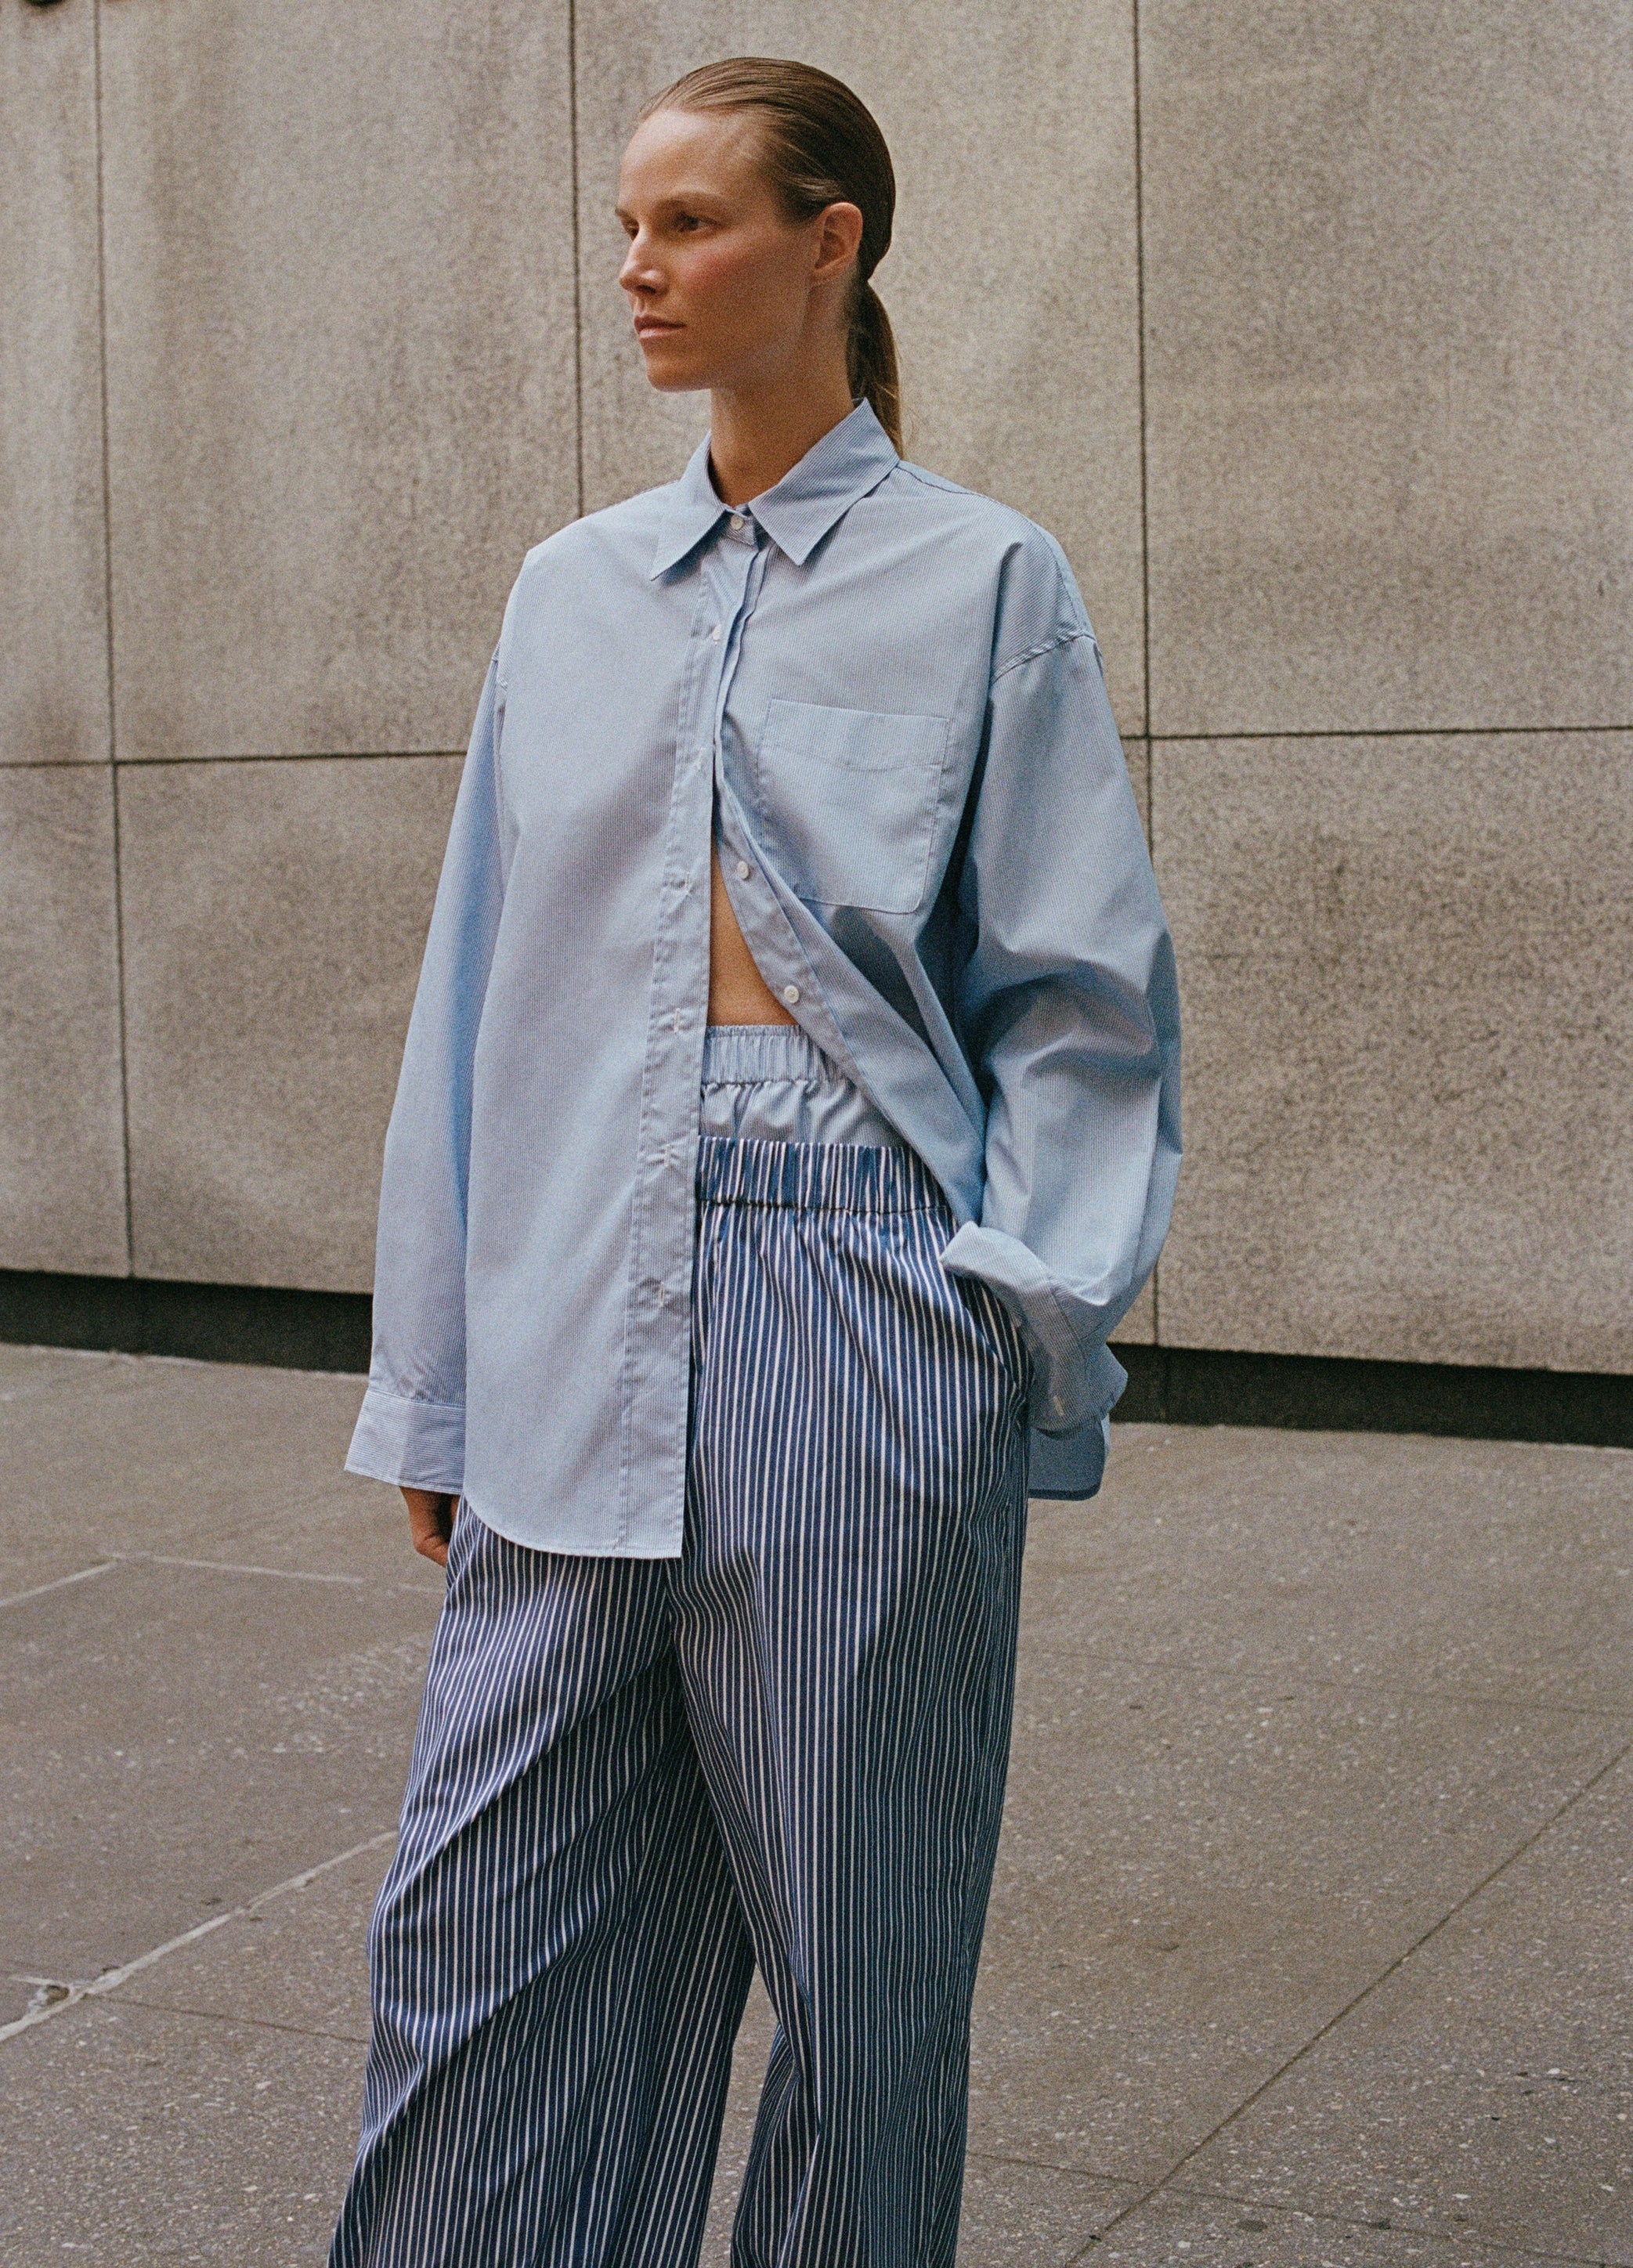 The Frankie Shop in the street model wearing the Mirca pants.